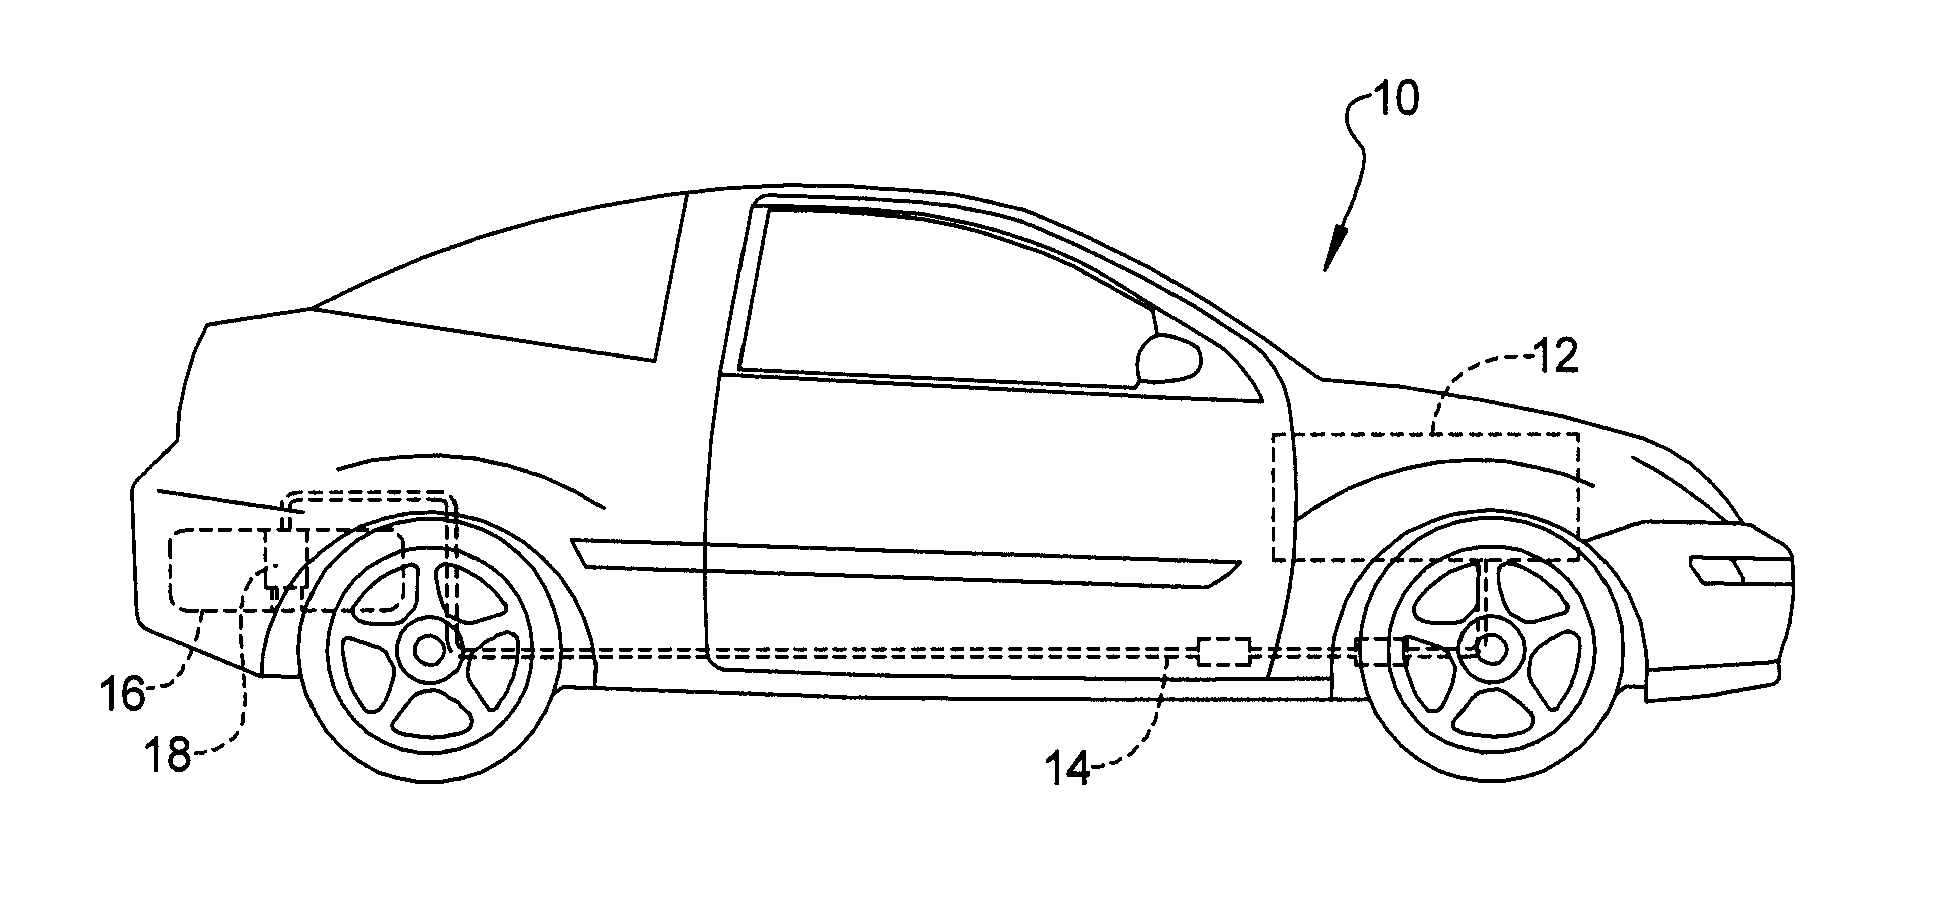 Integrated fuel injector orientation and retention device